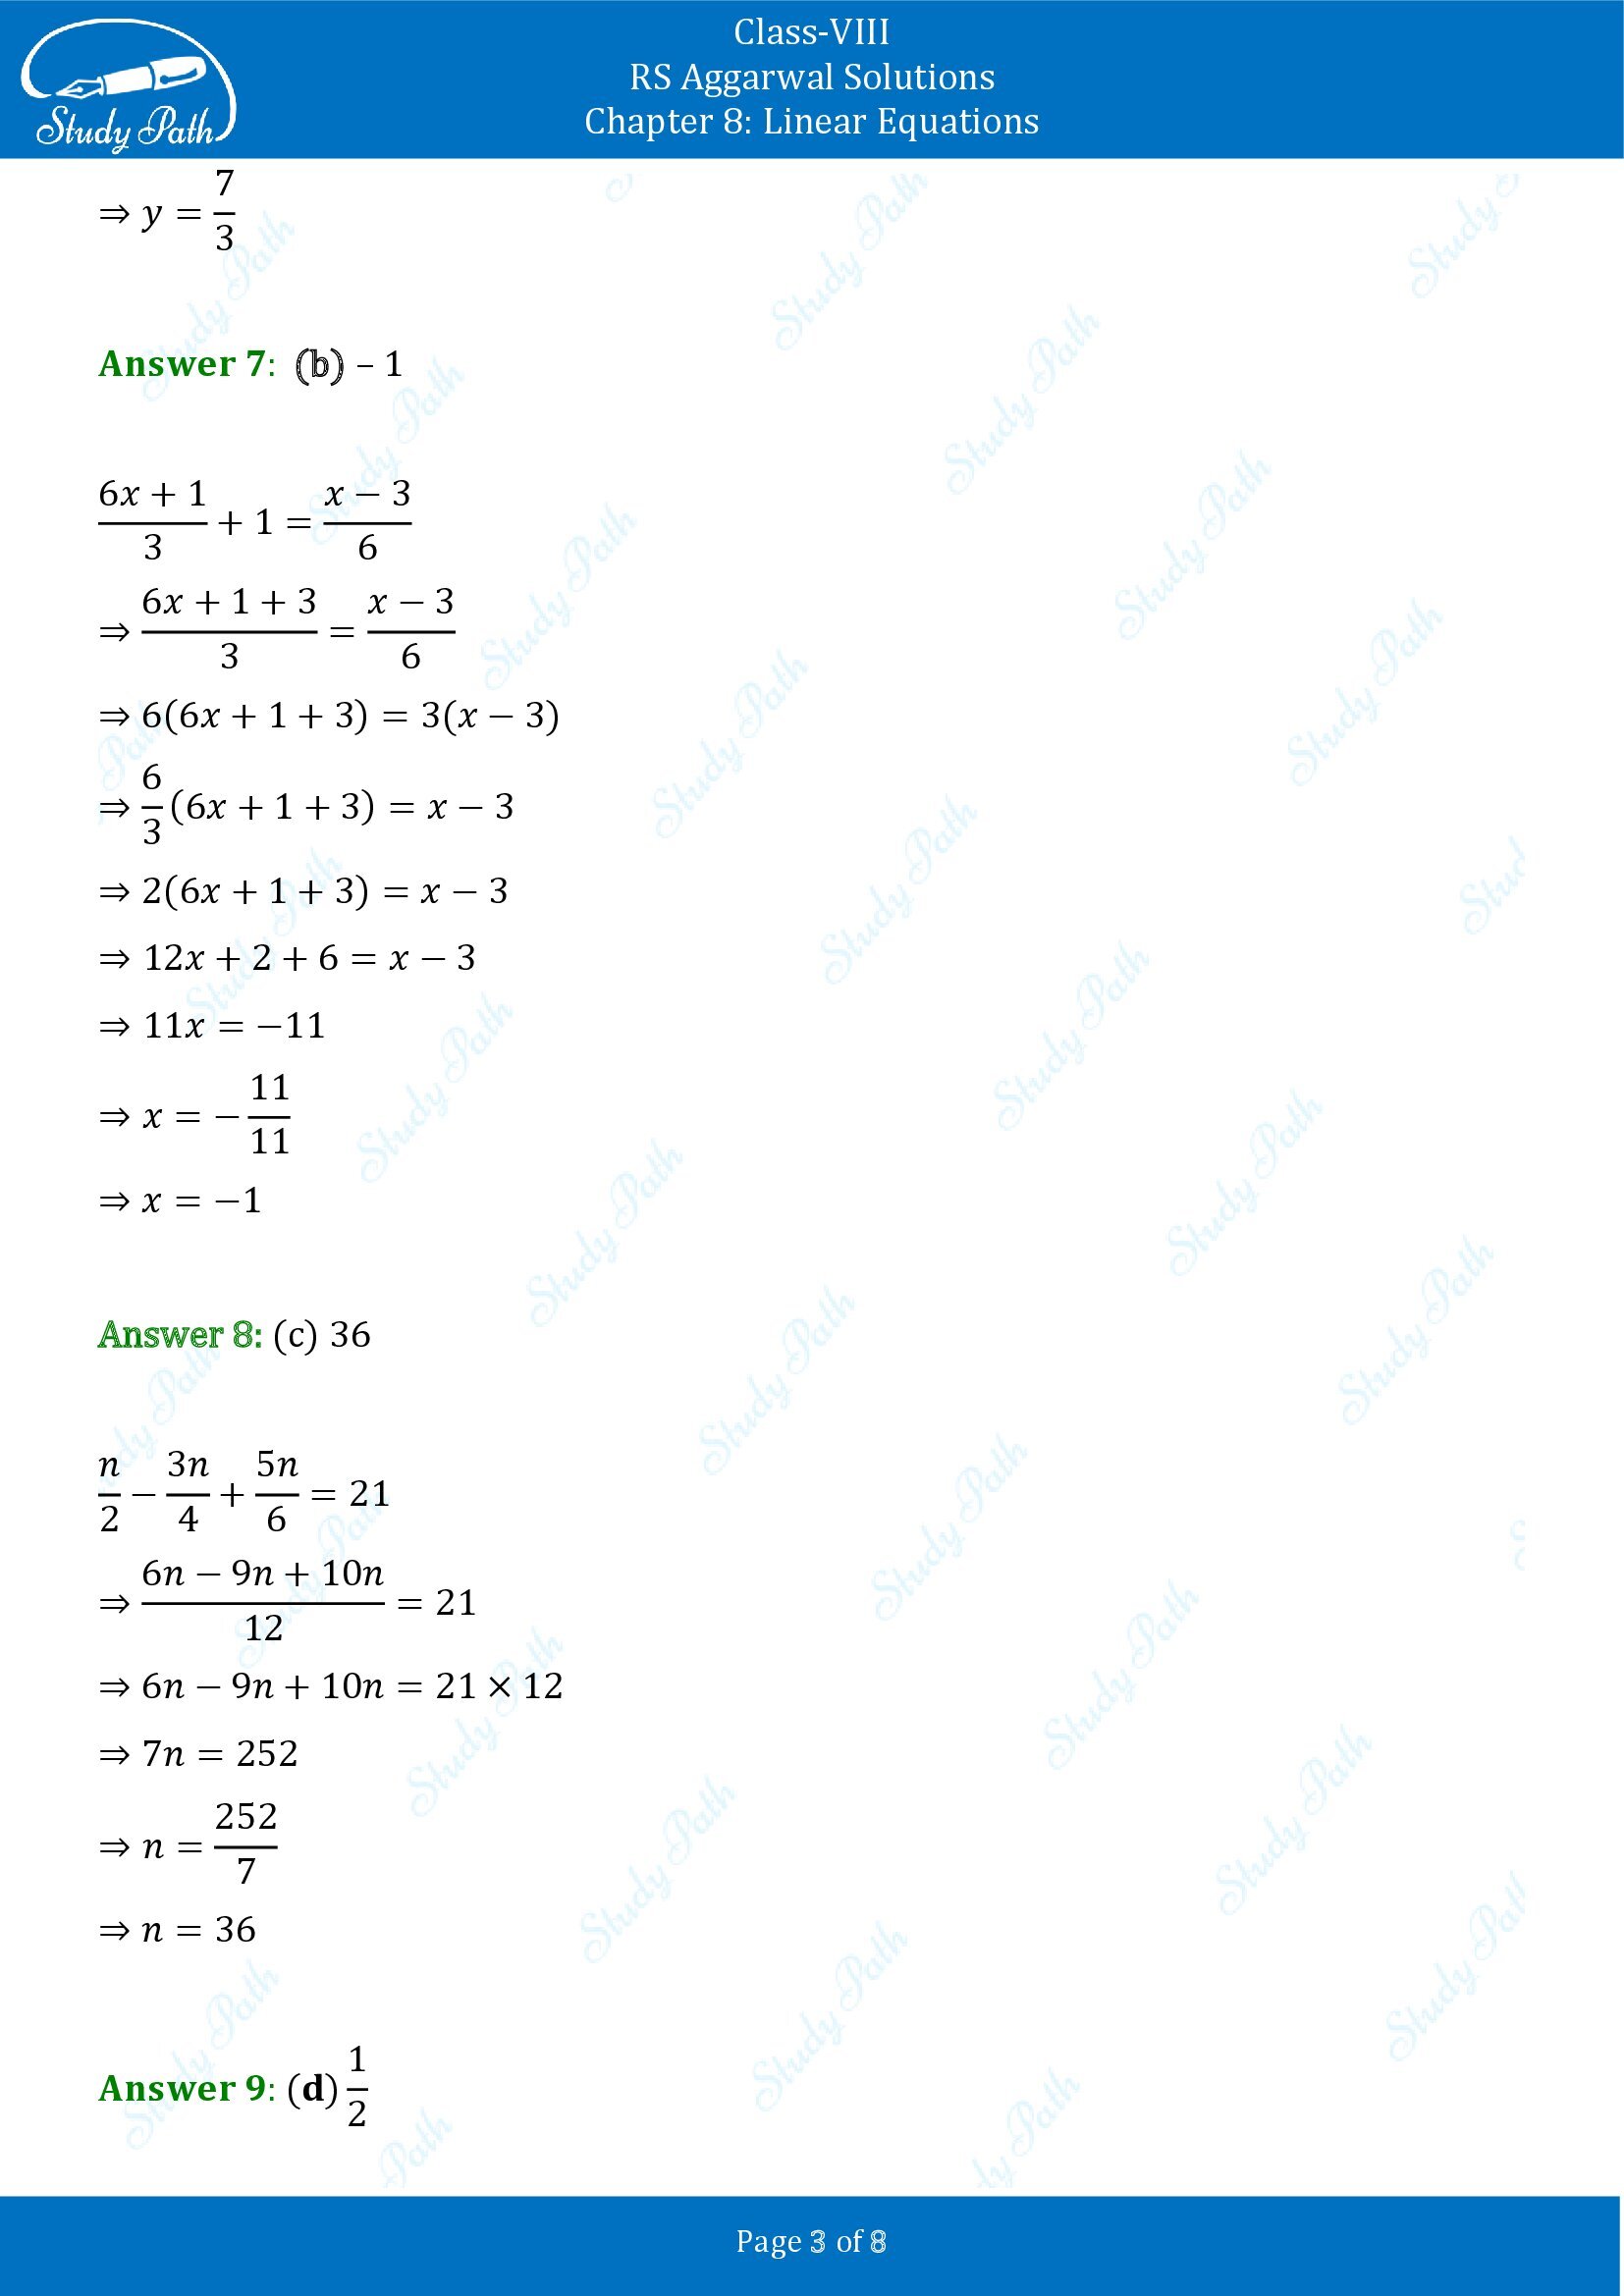 RS Aggarwal Solutions Class 8 Chapter 8 Linear Equations Exercise 8C MCQs 00003